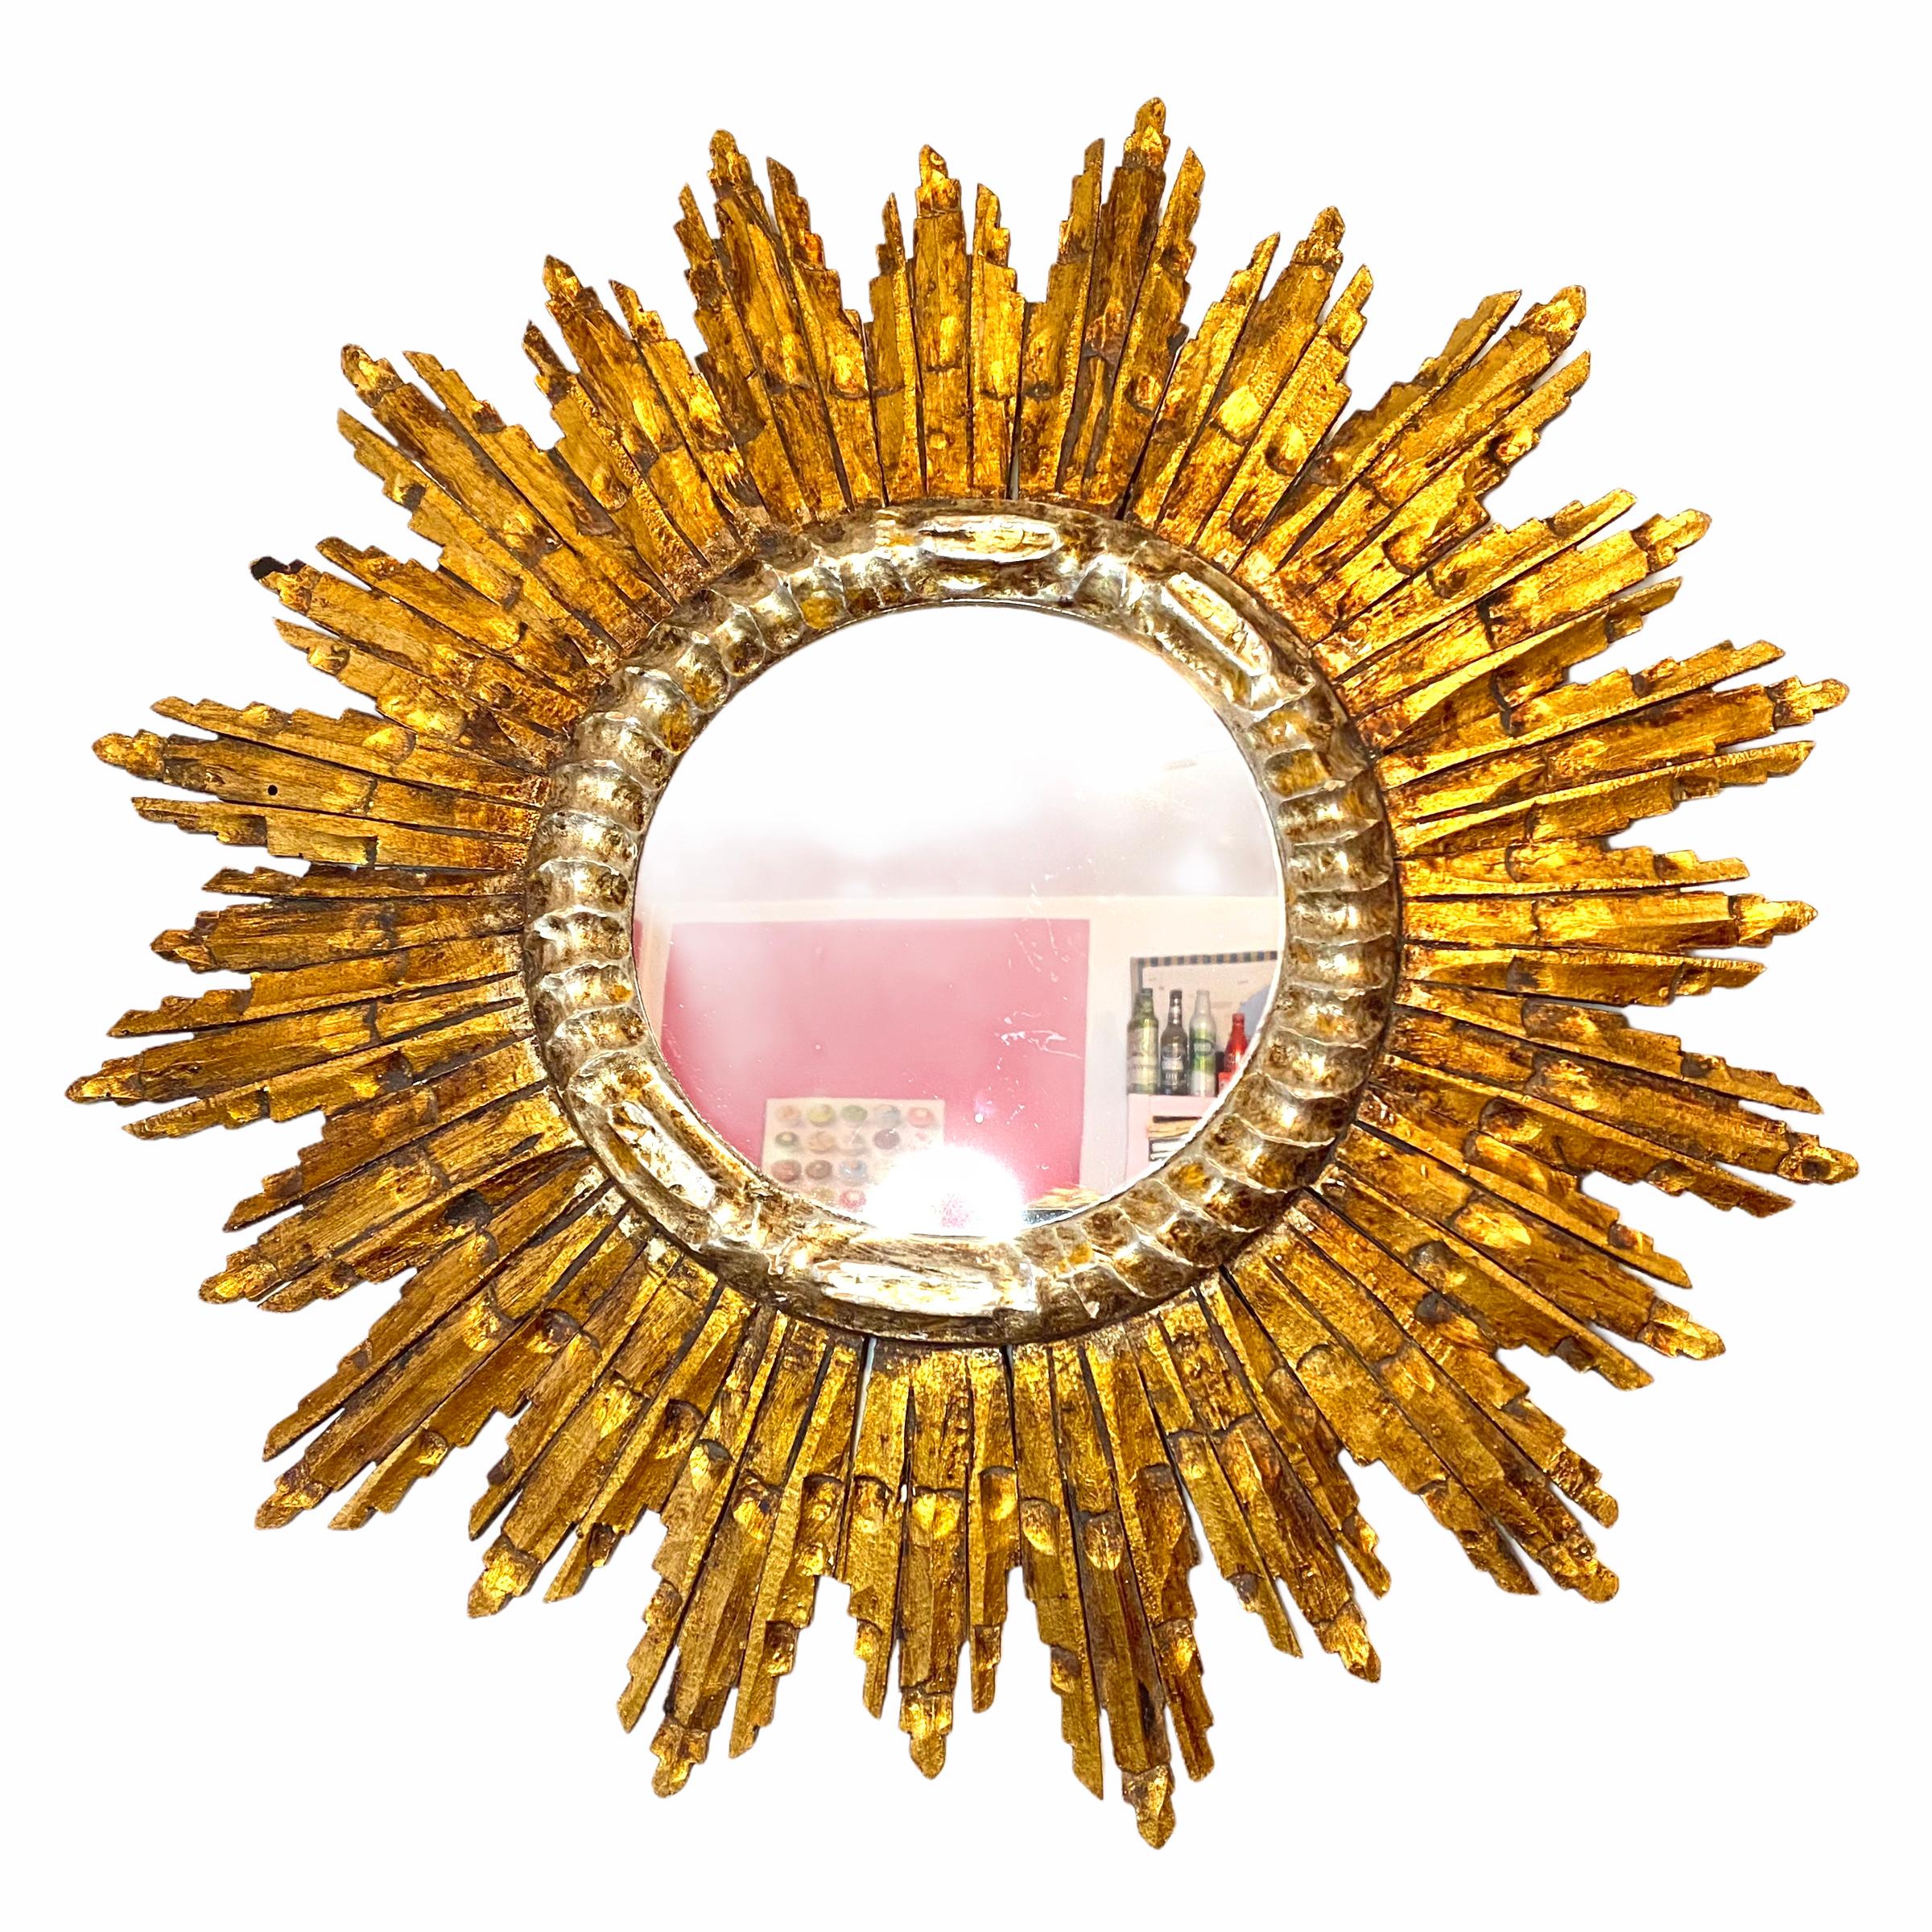 A gorgeous starburst sunburst mirror. Made of gilded wood. It measures approximate: 25